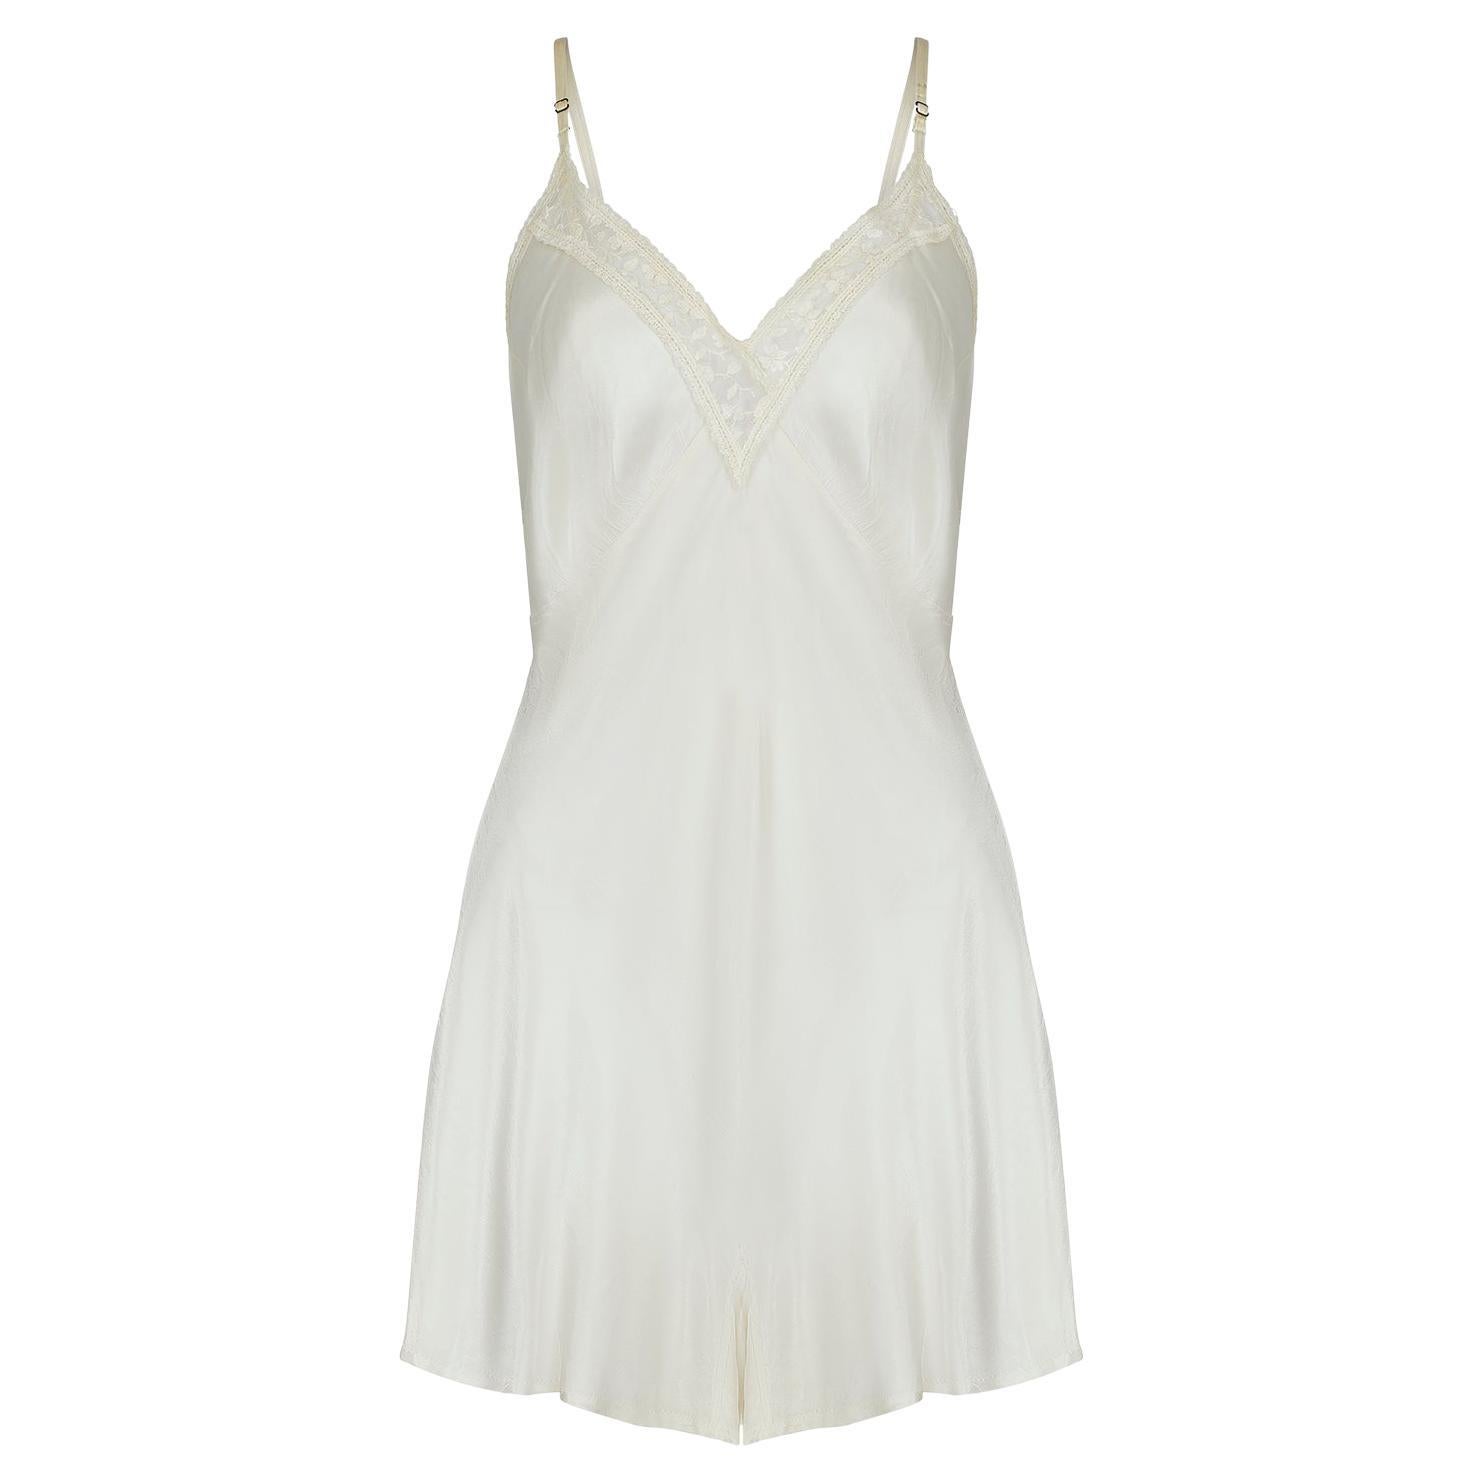 1940s CC41 Cream Satin and Lace Teddy Slip For Sale